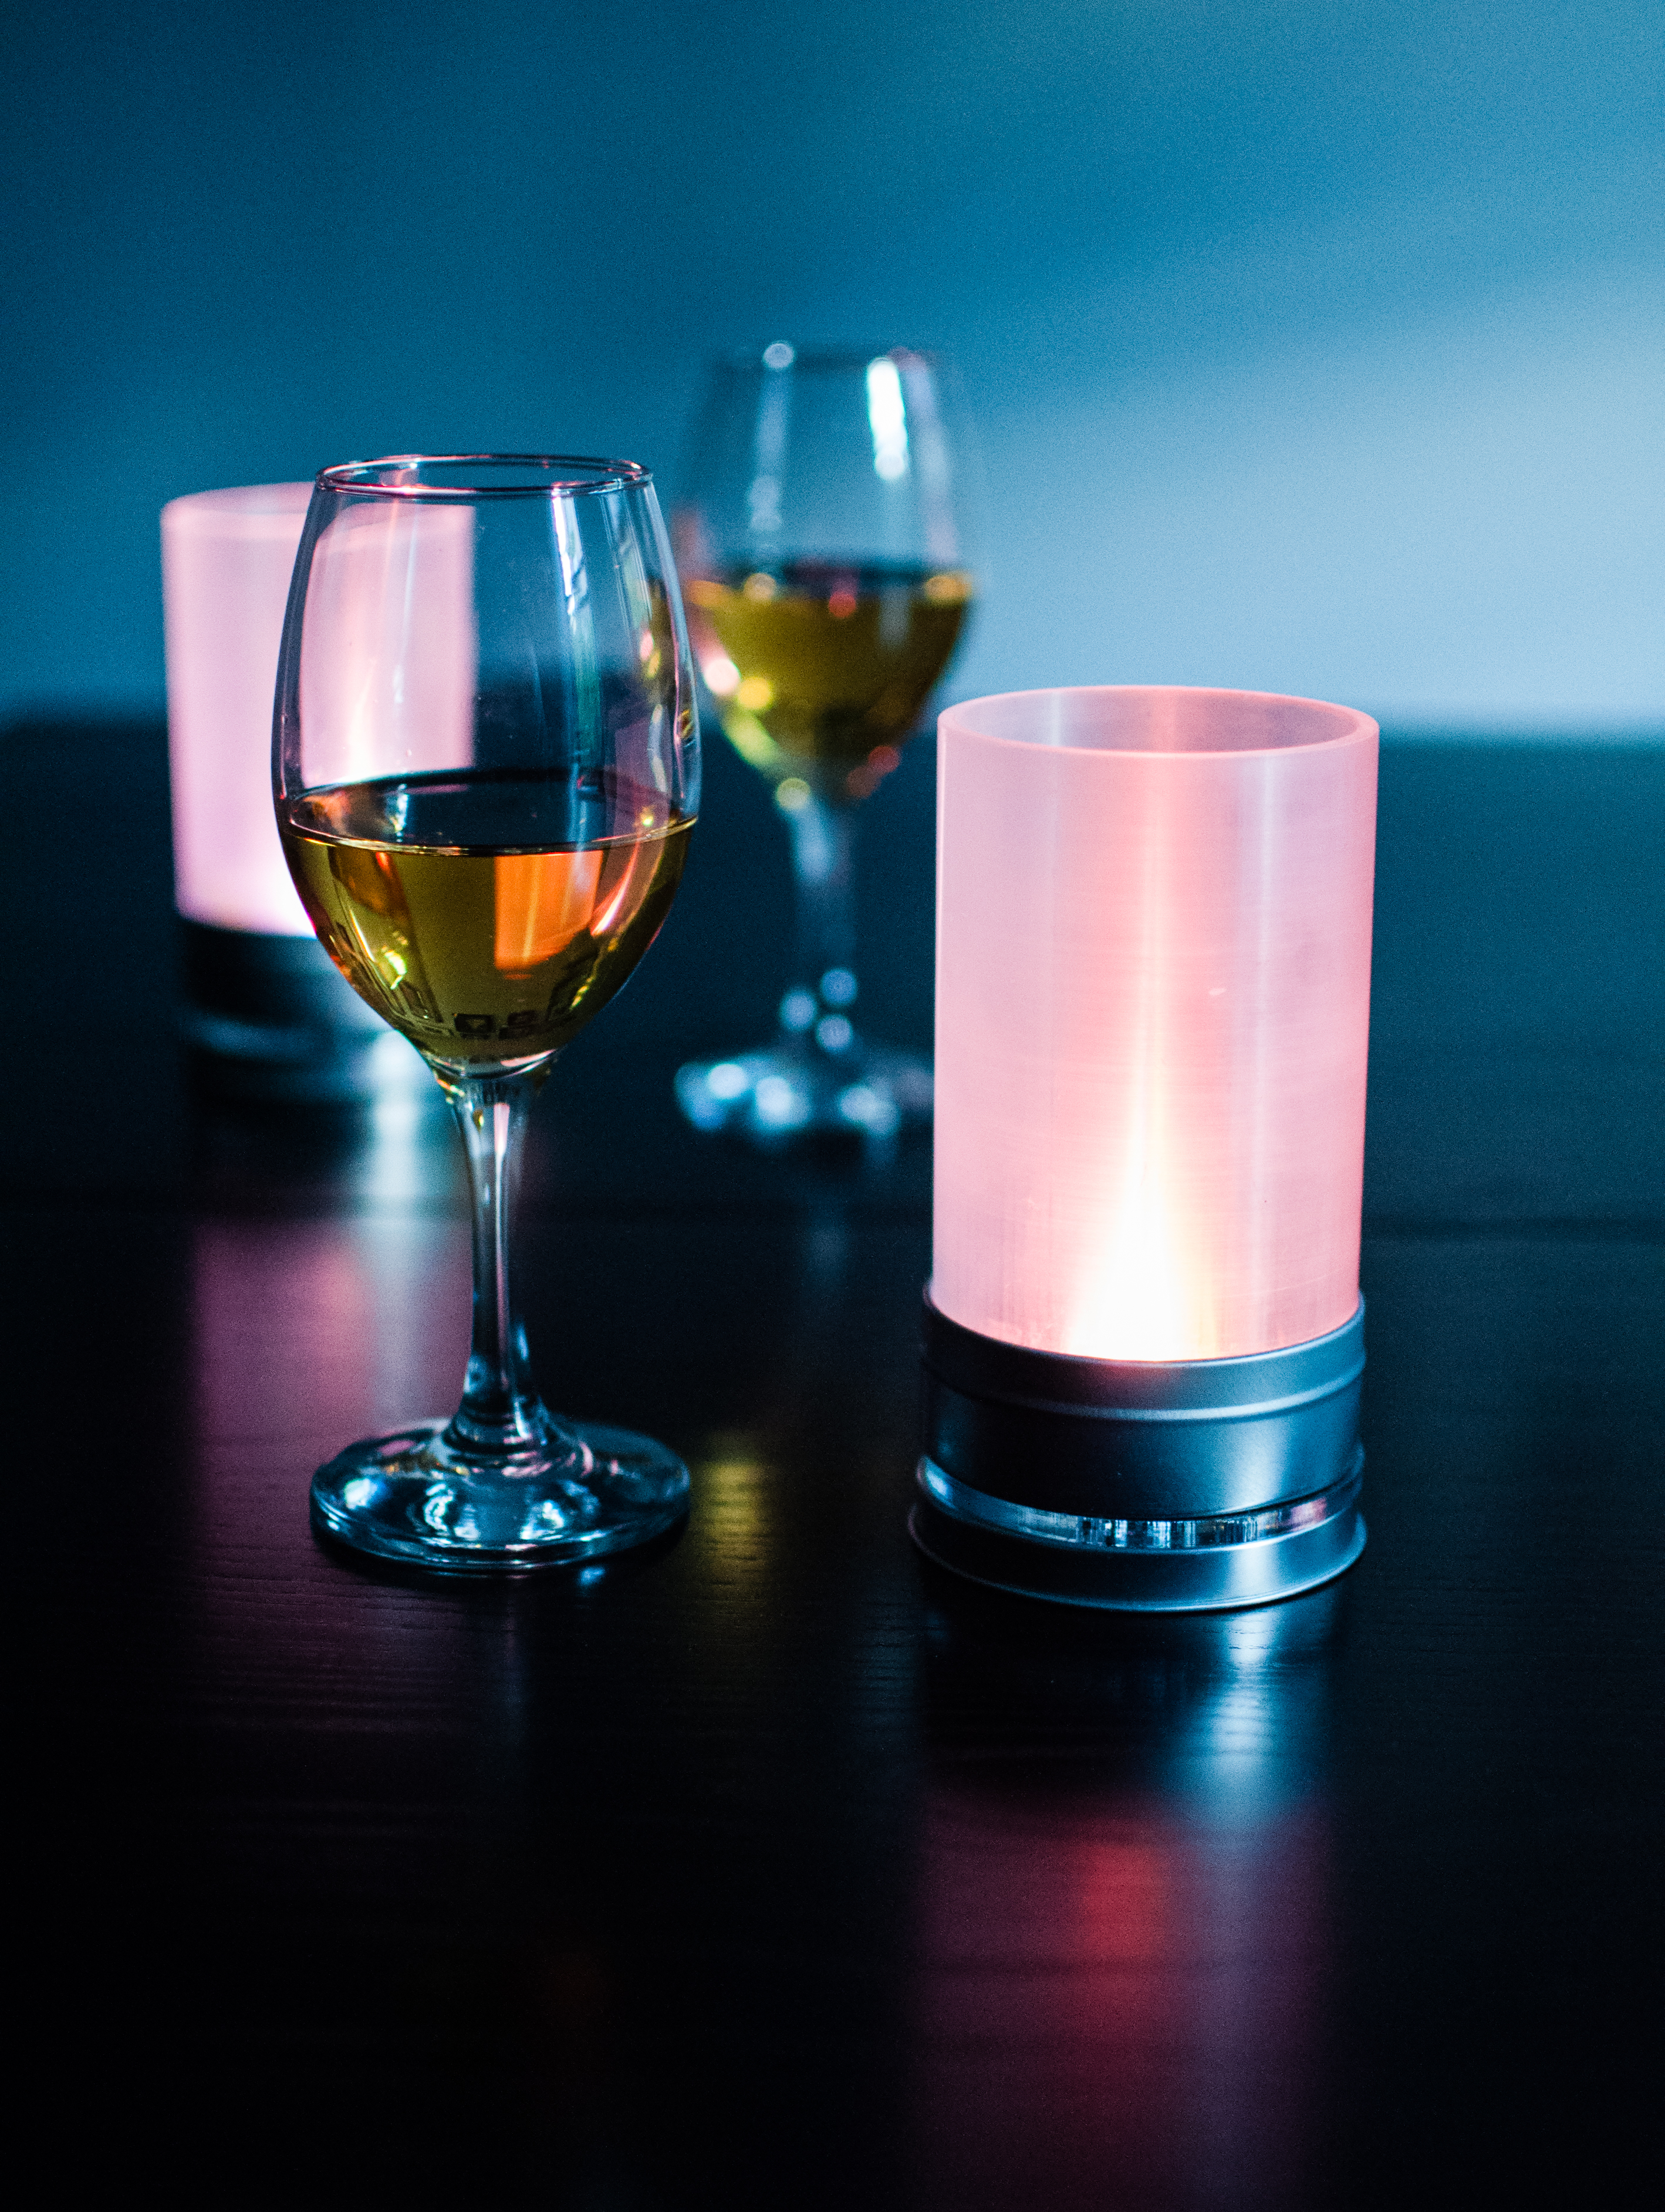 A pair of artificial candles set on a table with two glasses of wine